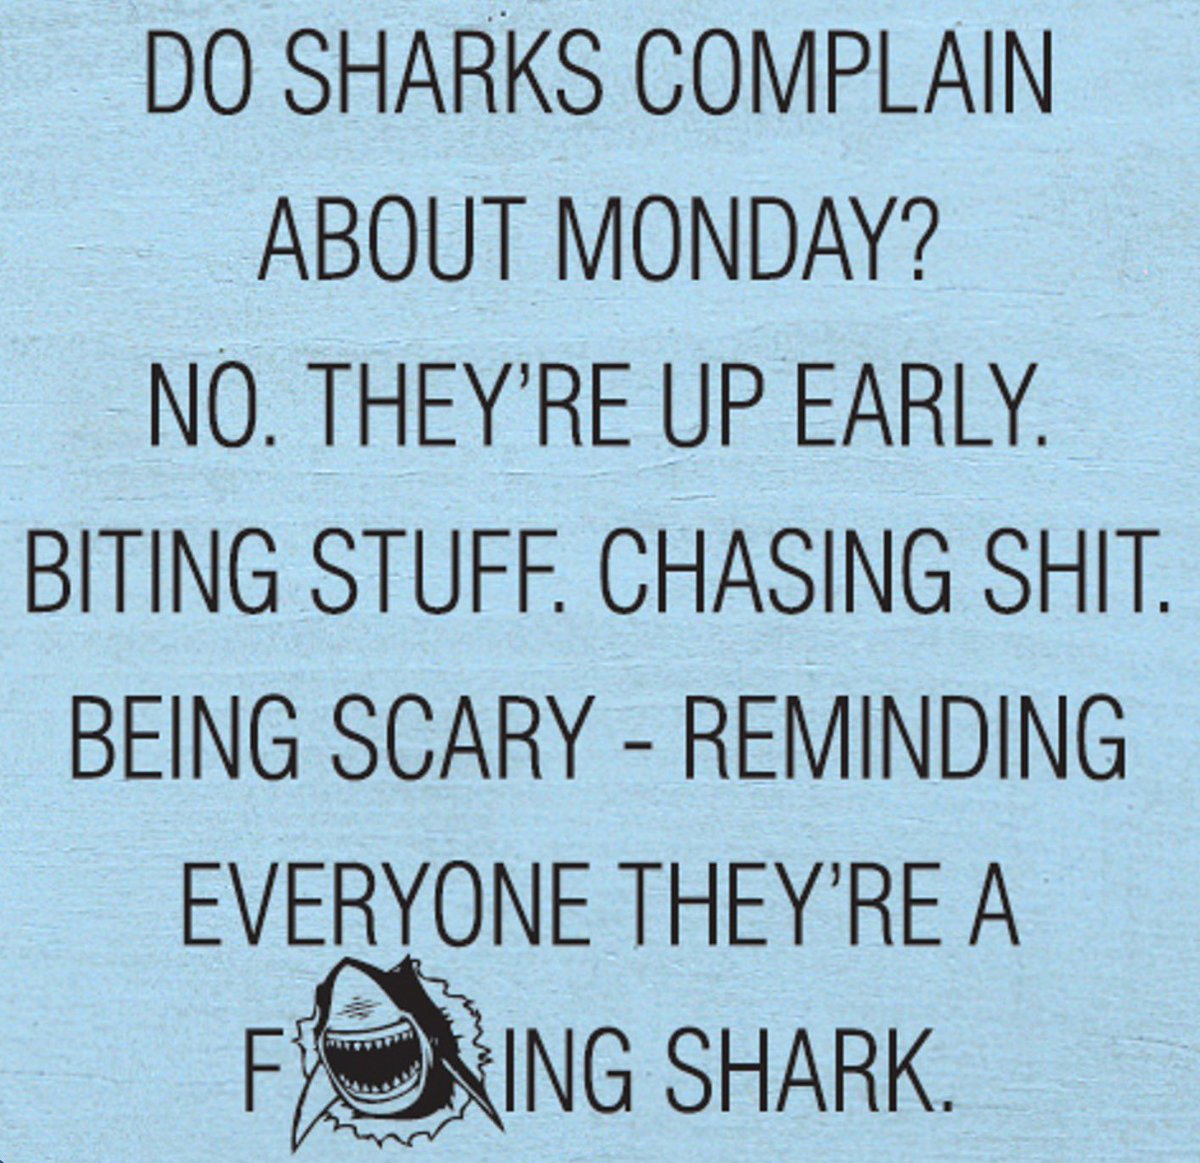 Be a shark.  

(Not sure who created this meme, but it’s good.)